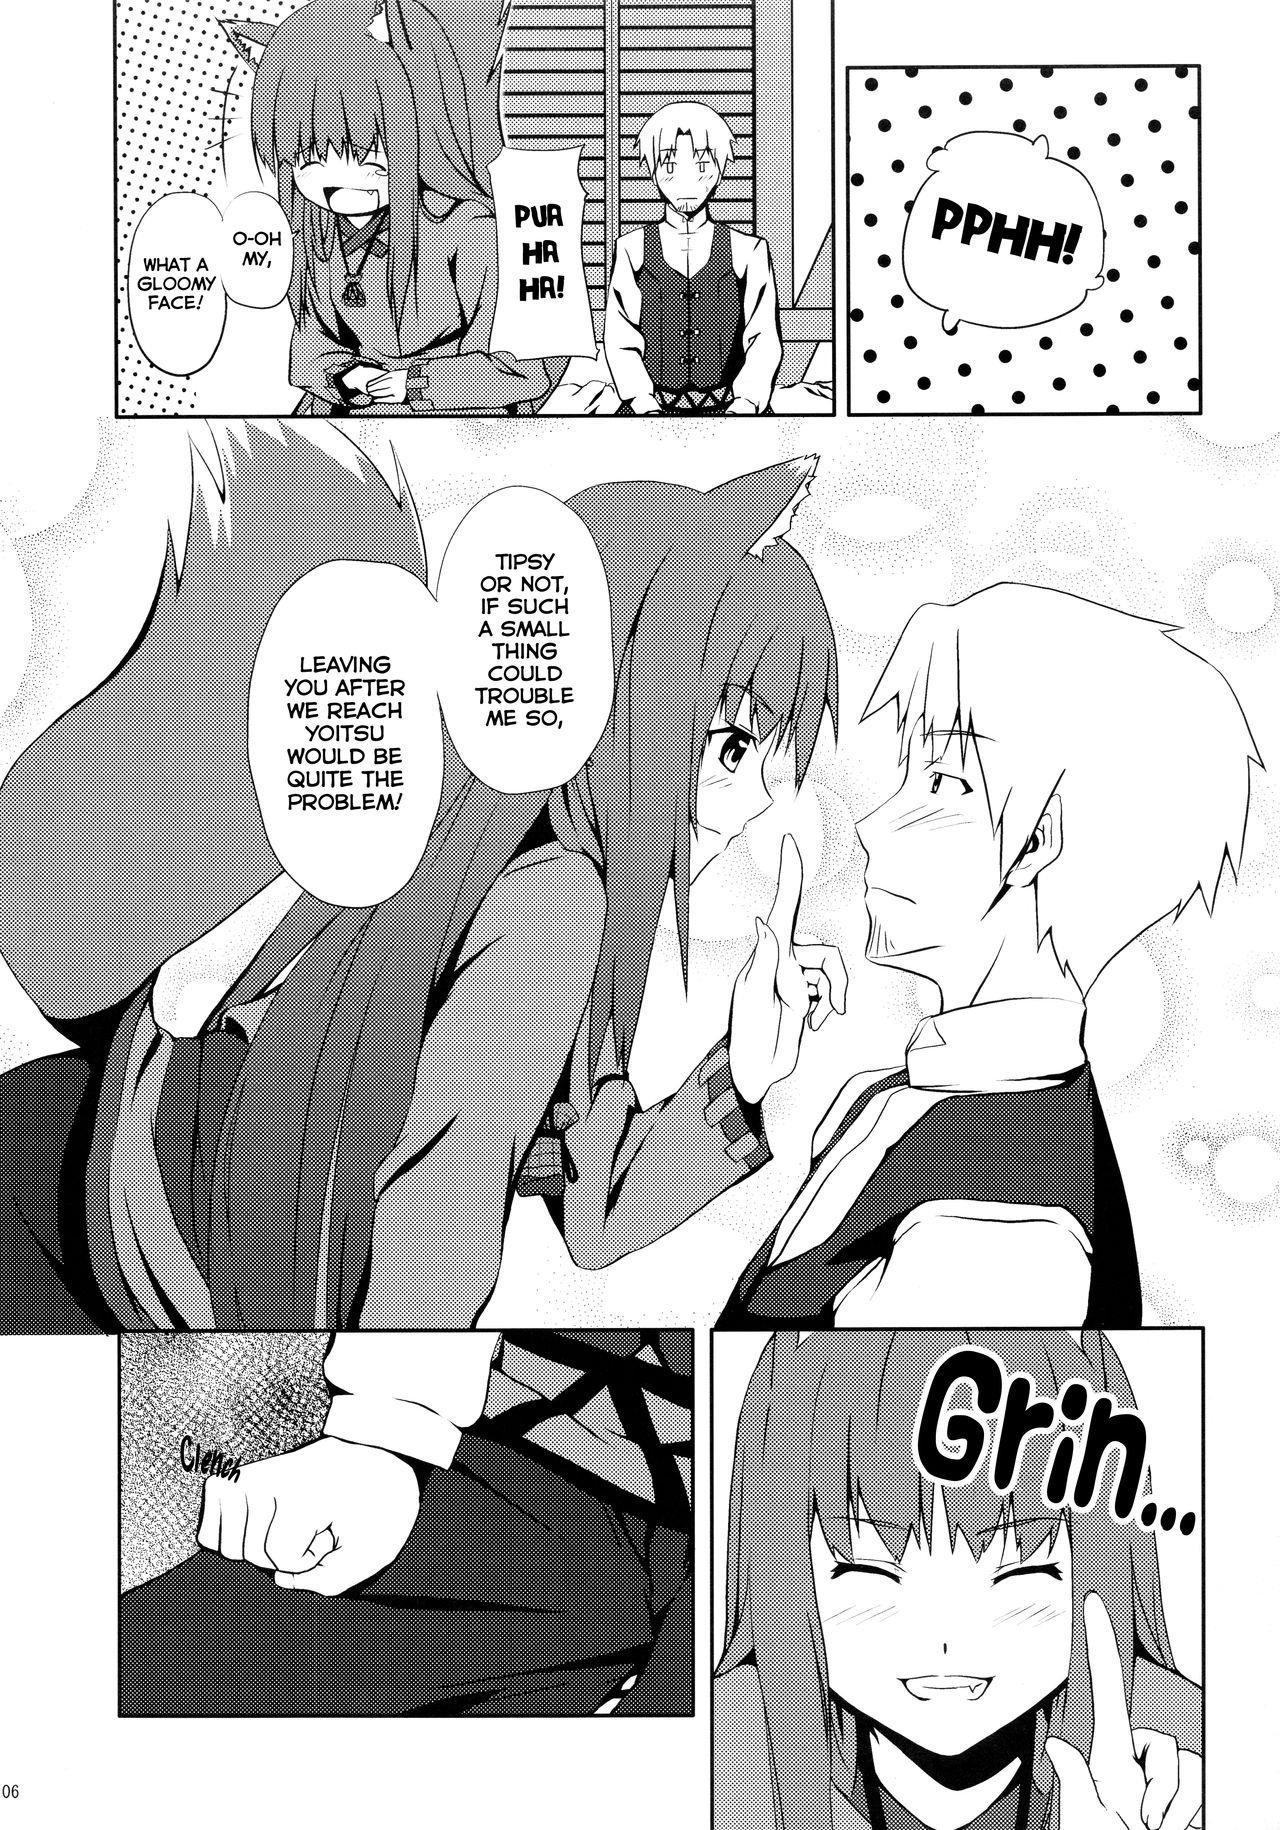 Gilf Bitter Apple - Spice and wolf Sissy - Page 6